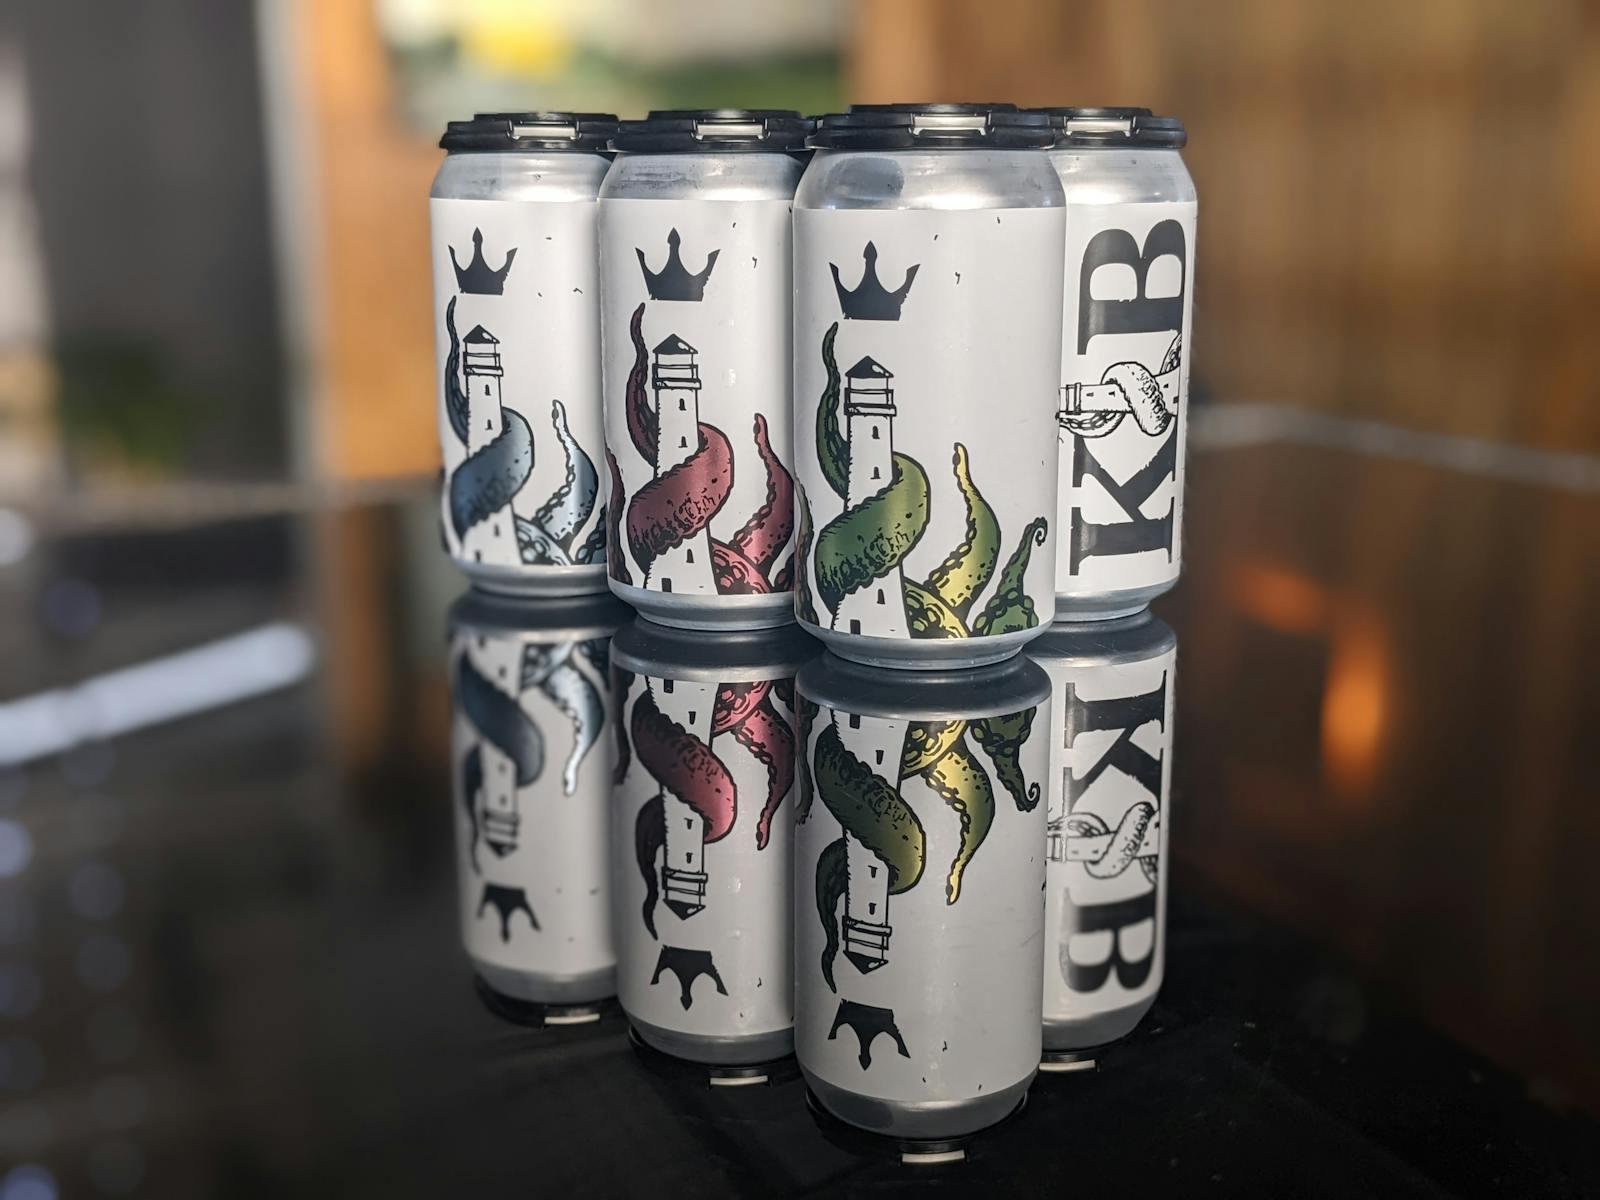 King Island Brewhouse Cans